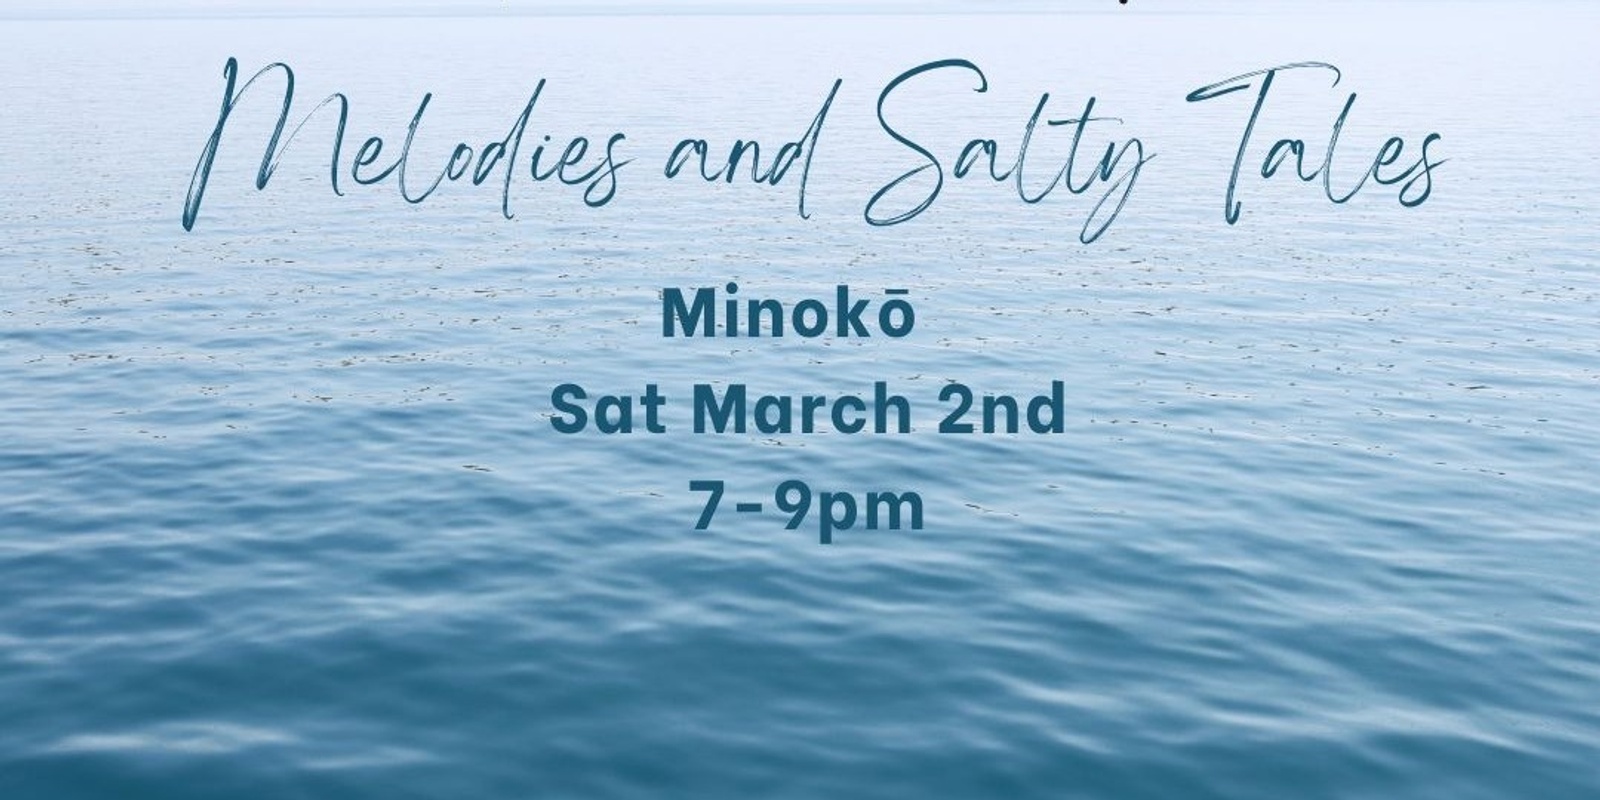 Banner image for Melodies and Salty Tales - Minokō